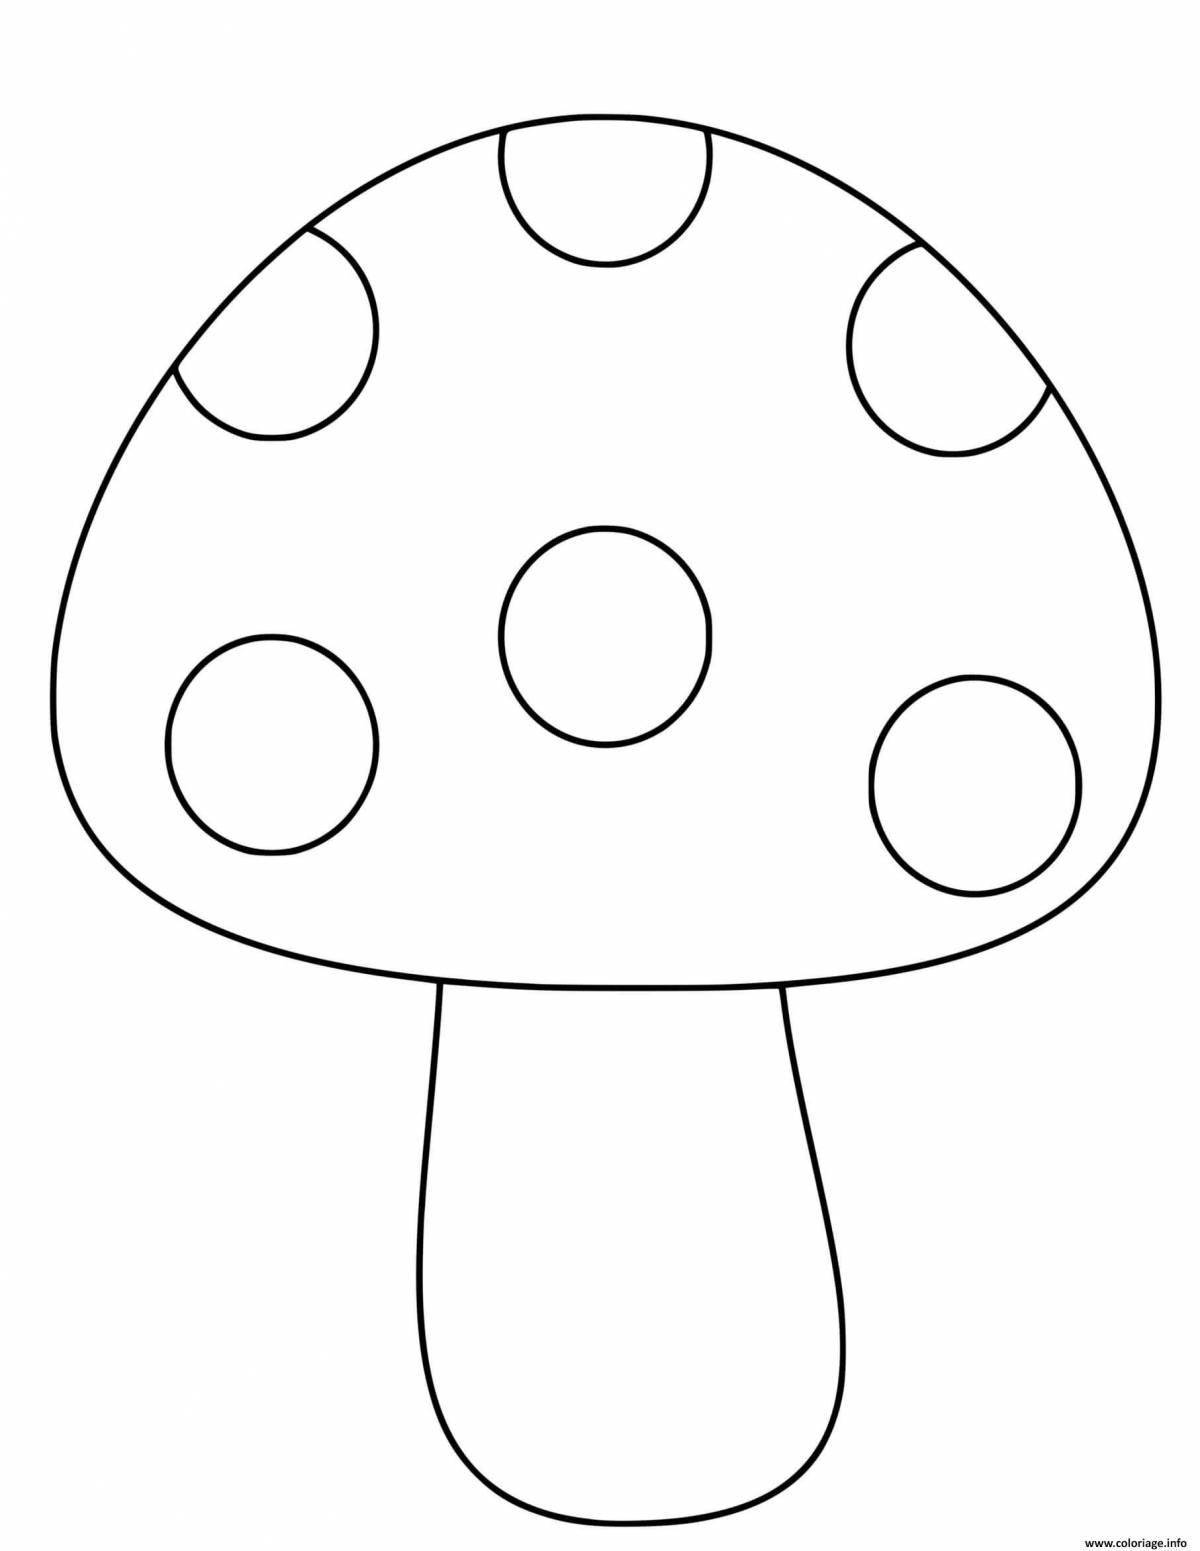 Fun coloring book of mushrooms for 3-4 year olds